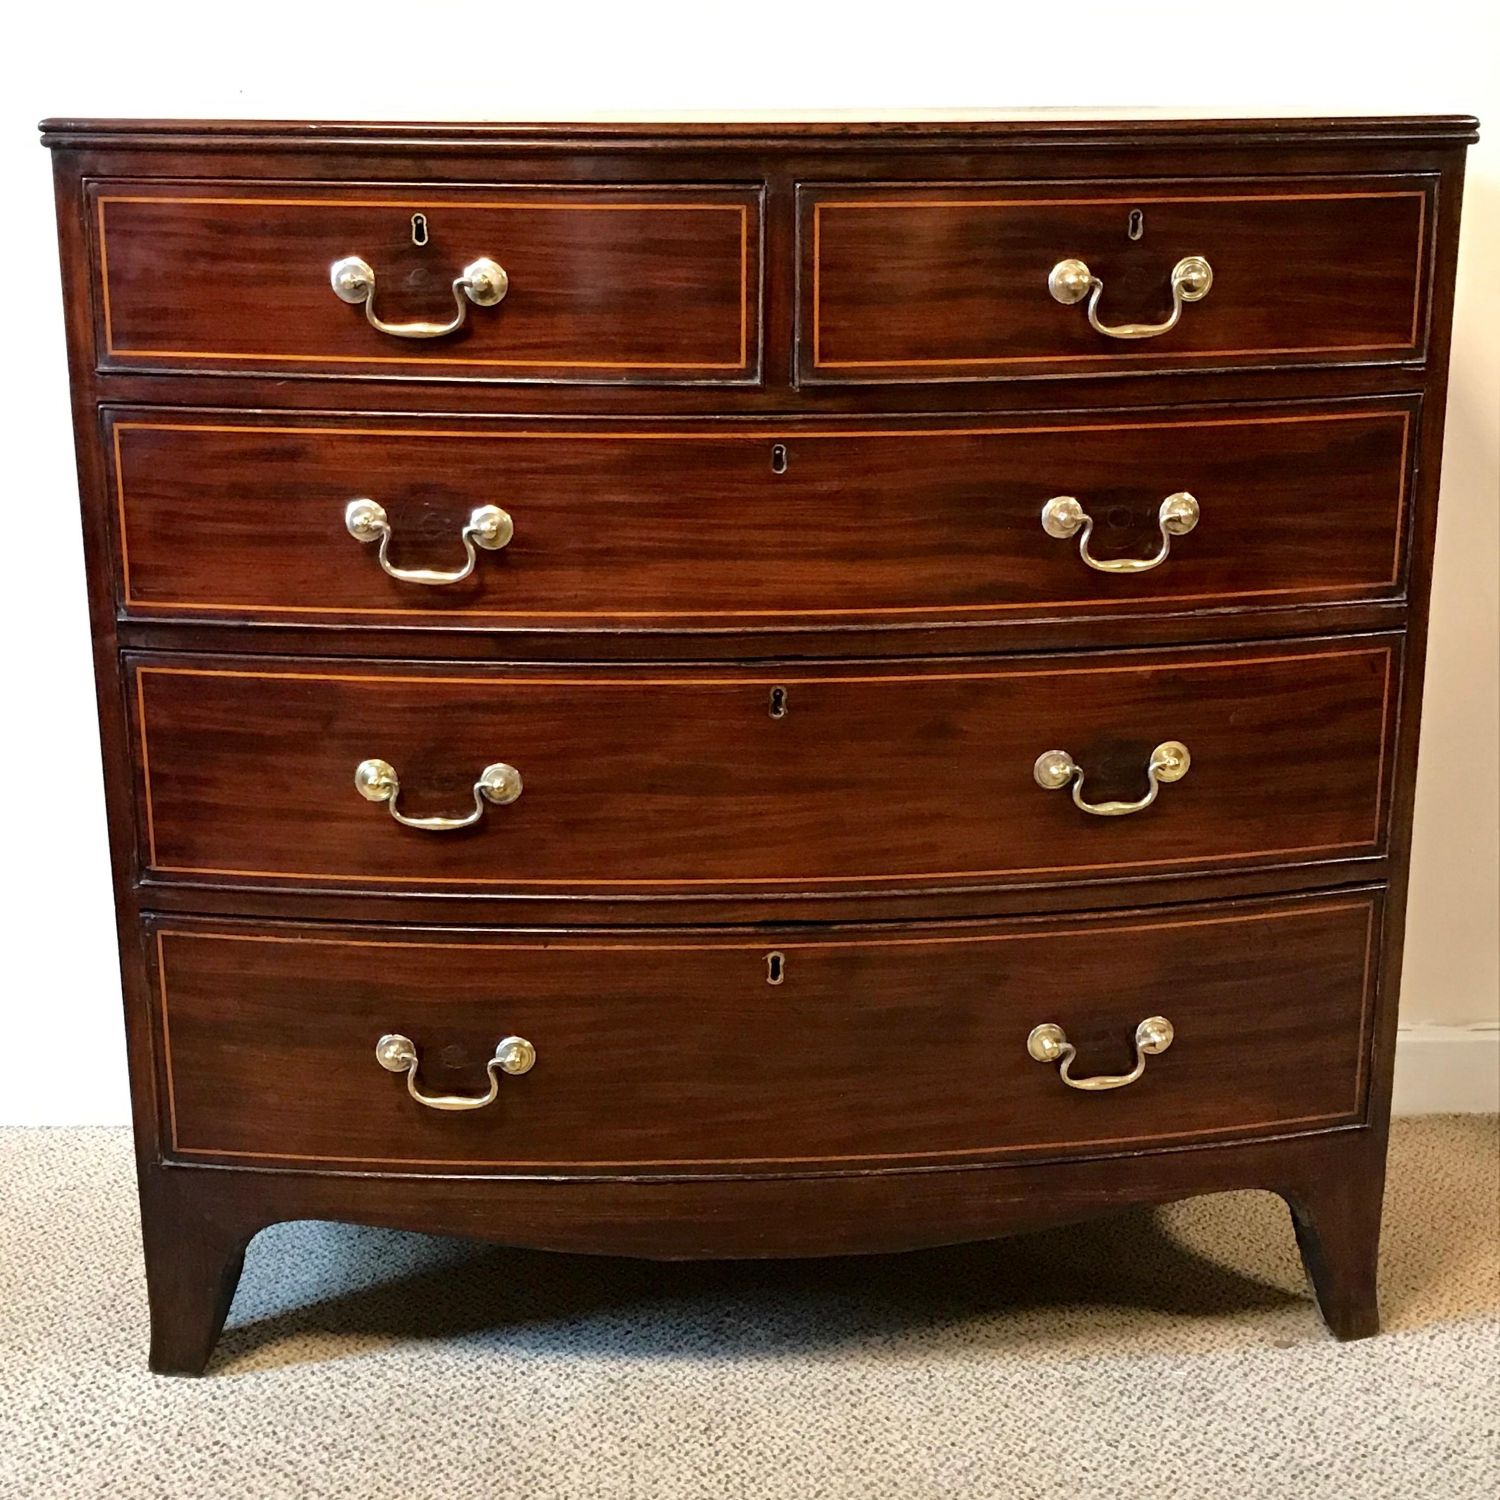 George Iii Period Mahogany Chest Of Drawers Antique Chest Of Drawers Hemswell Antique Centres